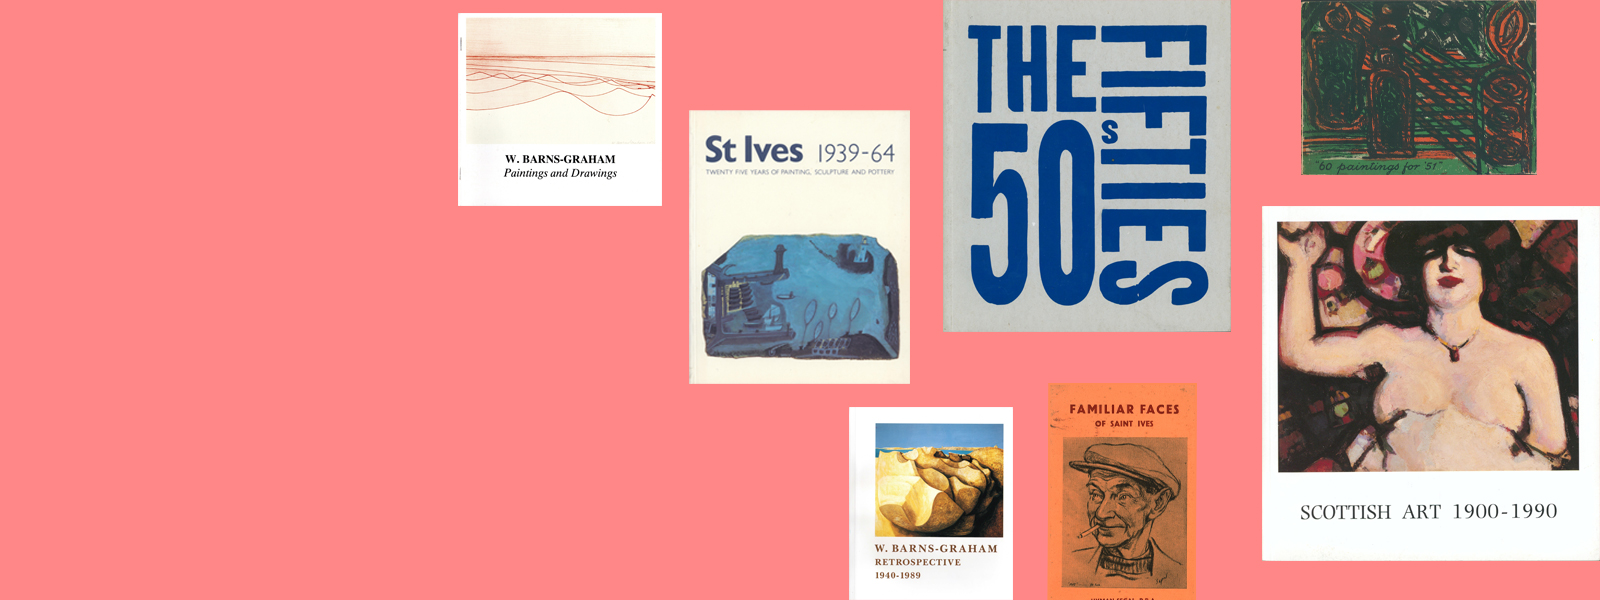 A selection of book covers on a salmon background. From left to right: W. Barns-Graham: Paintings and Drawings; St Ives 1939-64: Twenty Five Years of Painting, Sculpture and Pottery; W. Barns-Graham: Retrospective 1940-1989; The Fifties; Familiar Faces of St Ives; 60 paintings for '51; Scottish Art 1900-1990.